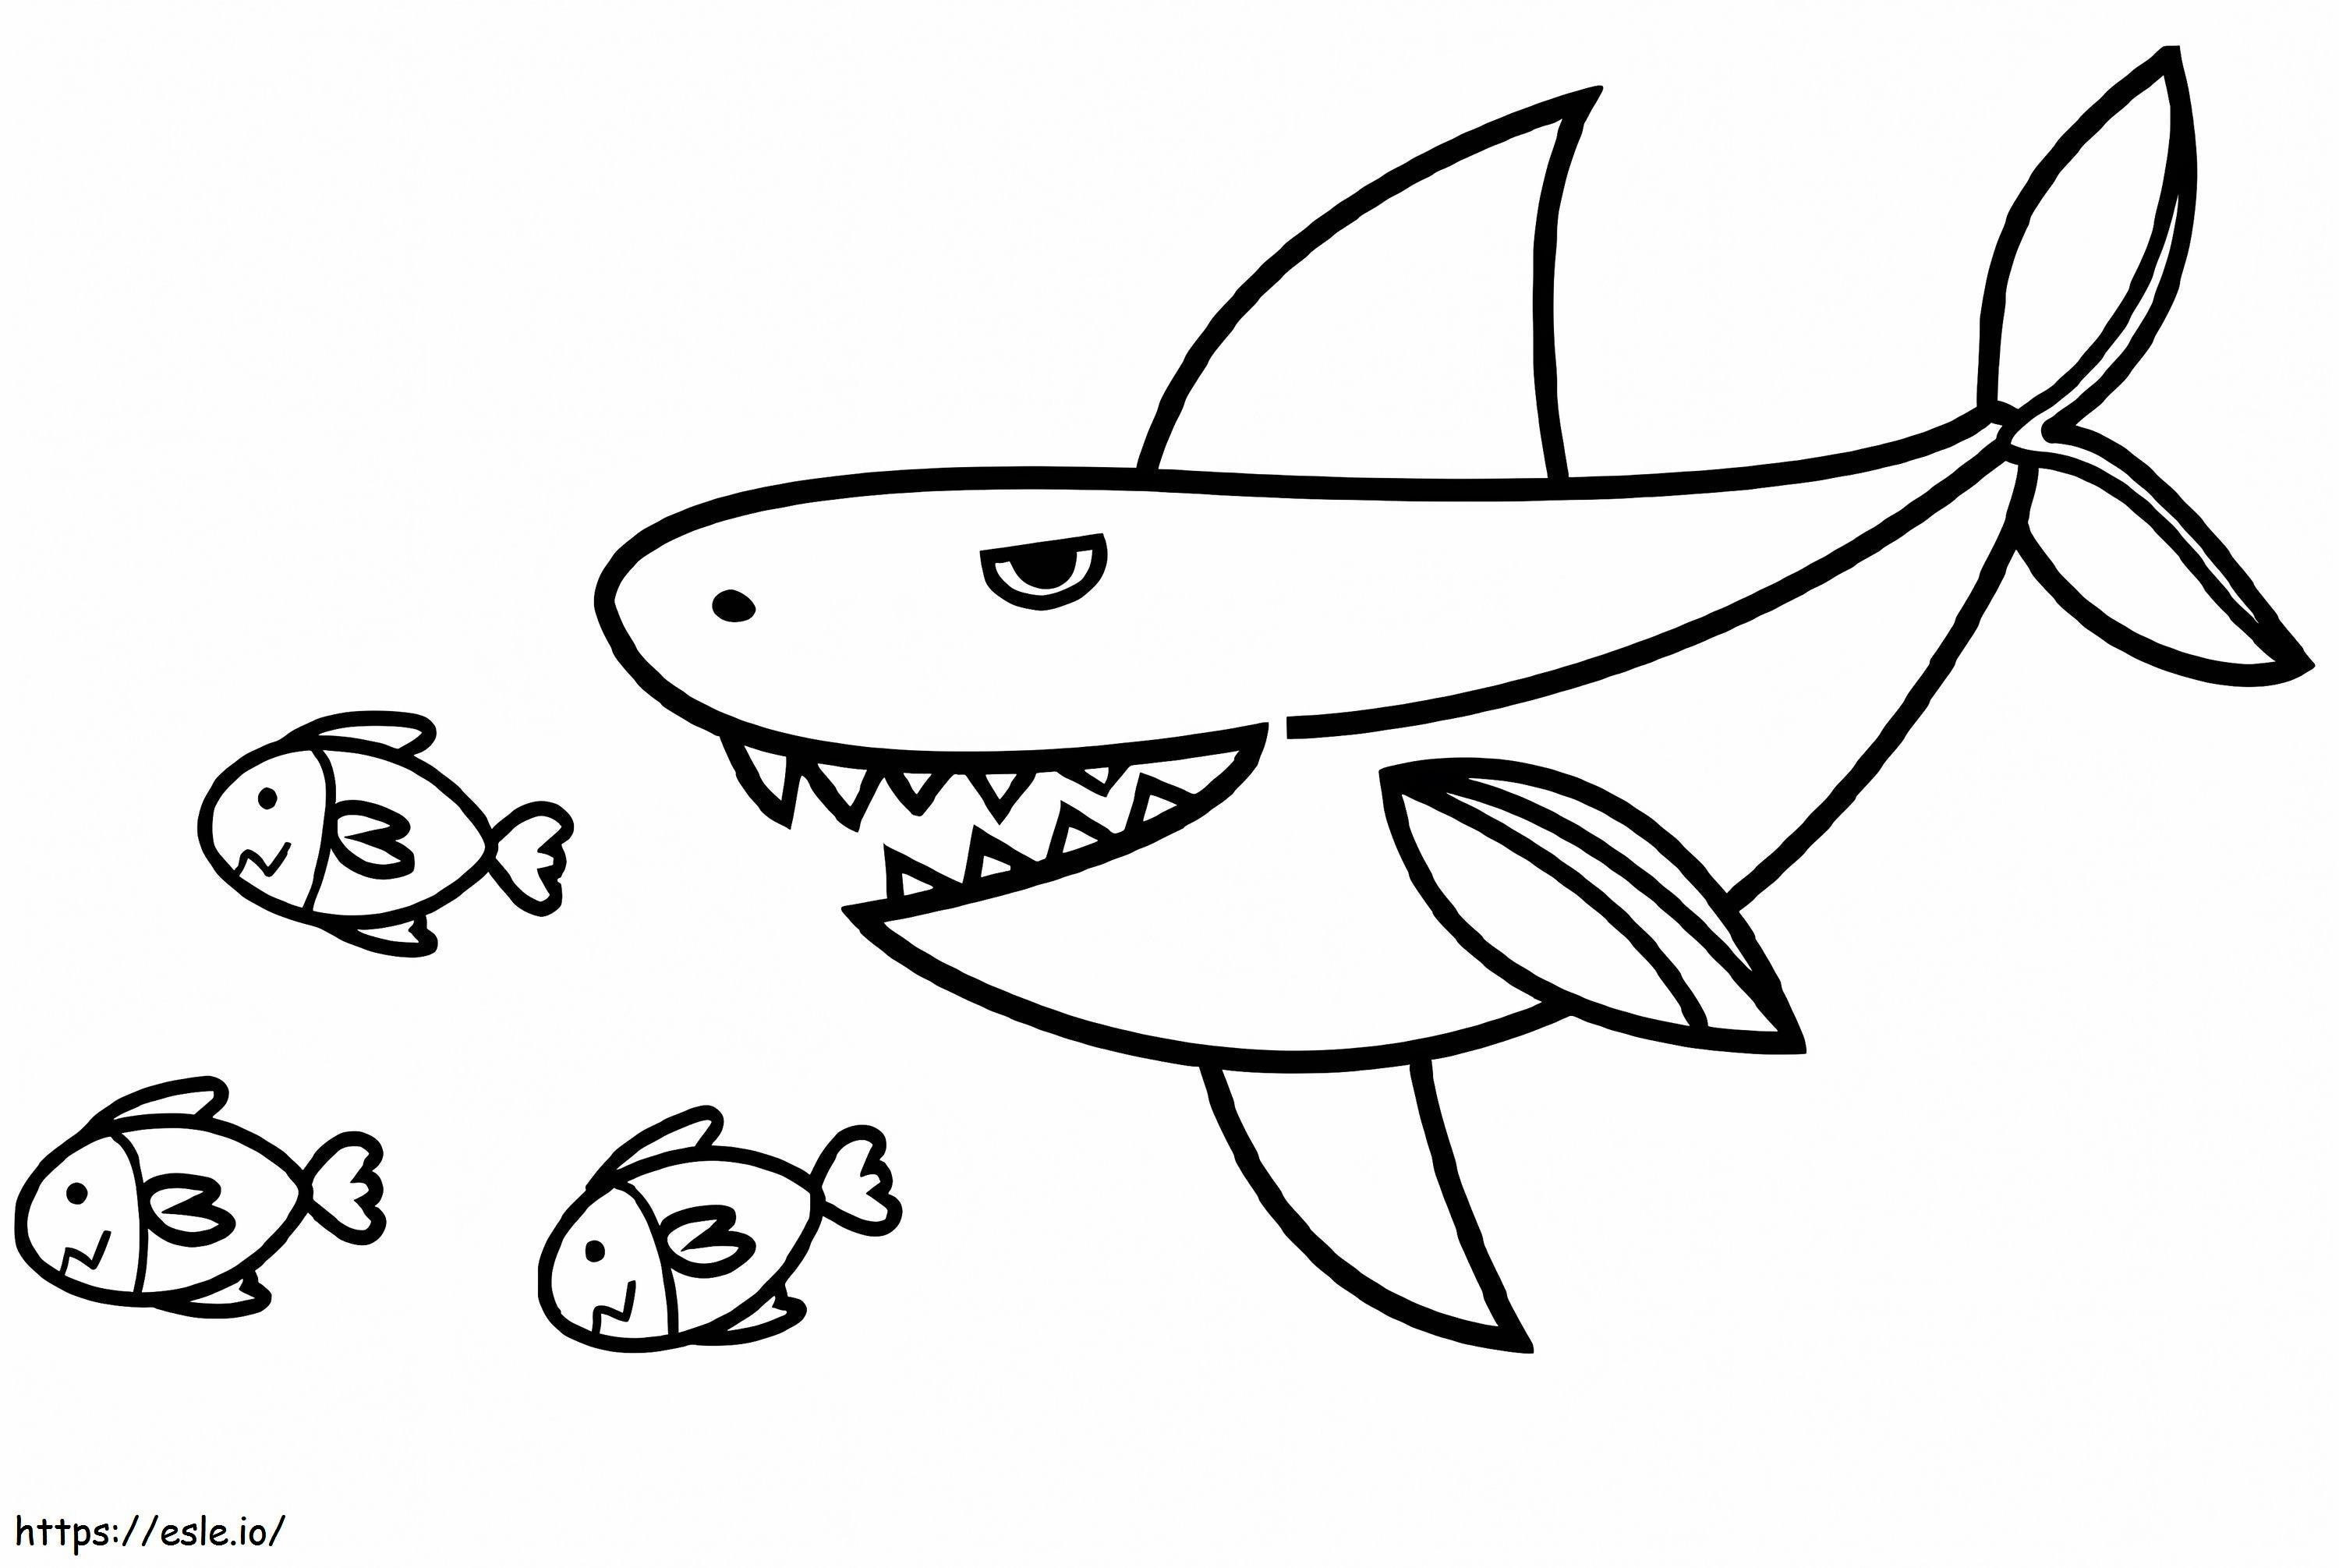 Shark Hunting Fishes coloring page